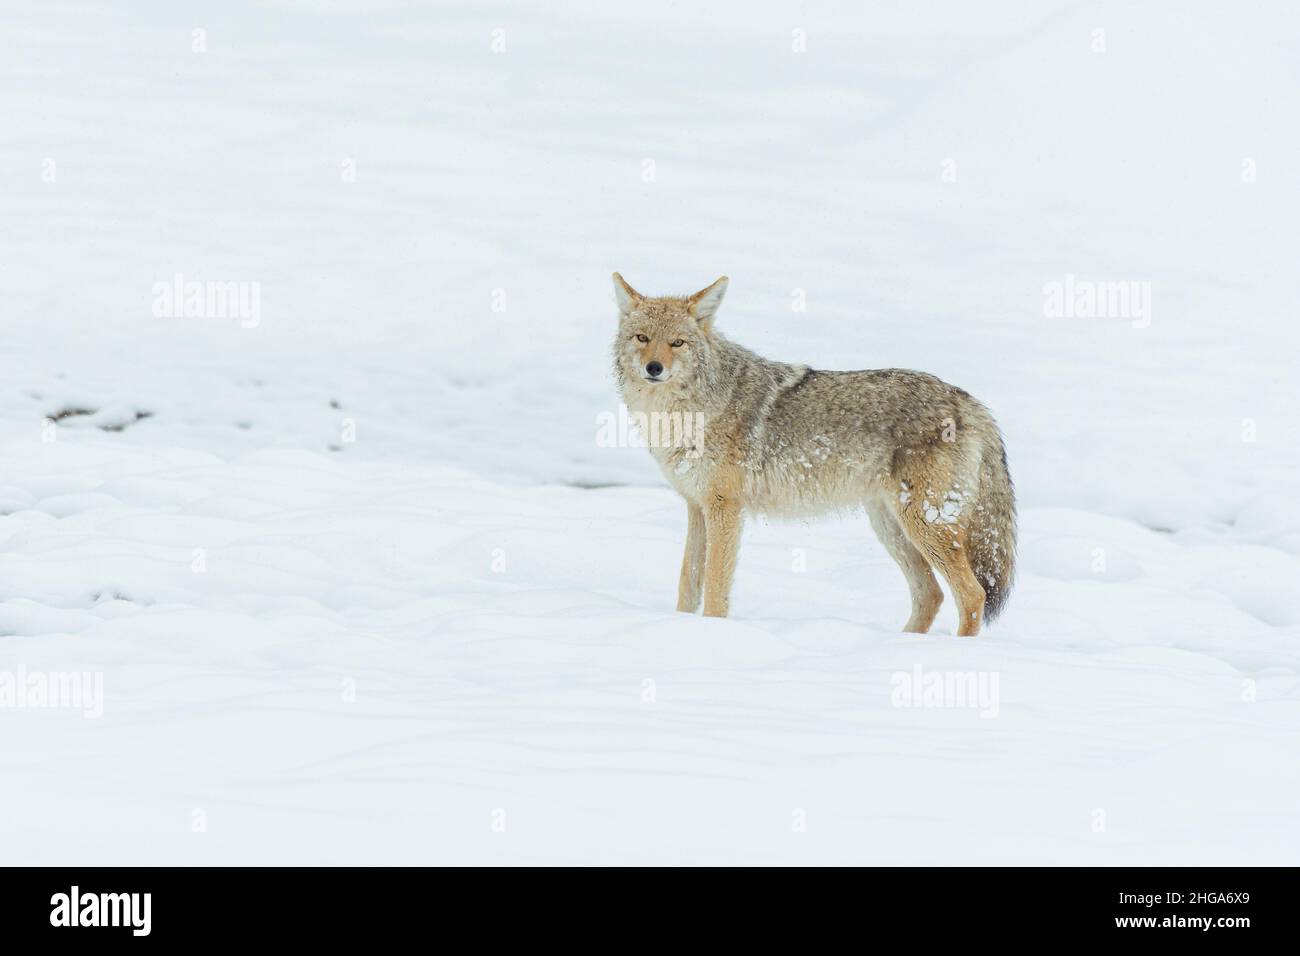 A coyote (Canis latrans) stands in the snow in Yellowstone National Park, Wyoming, USA. Stock Photo